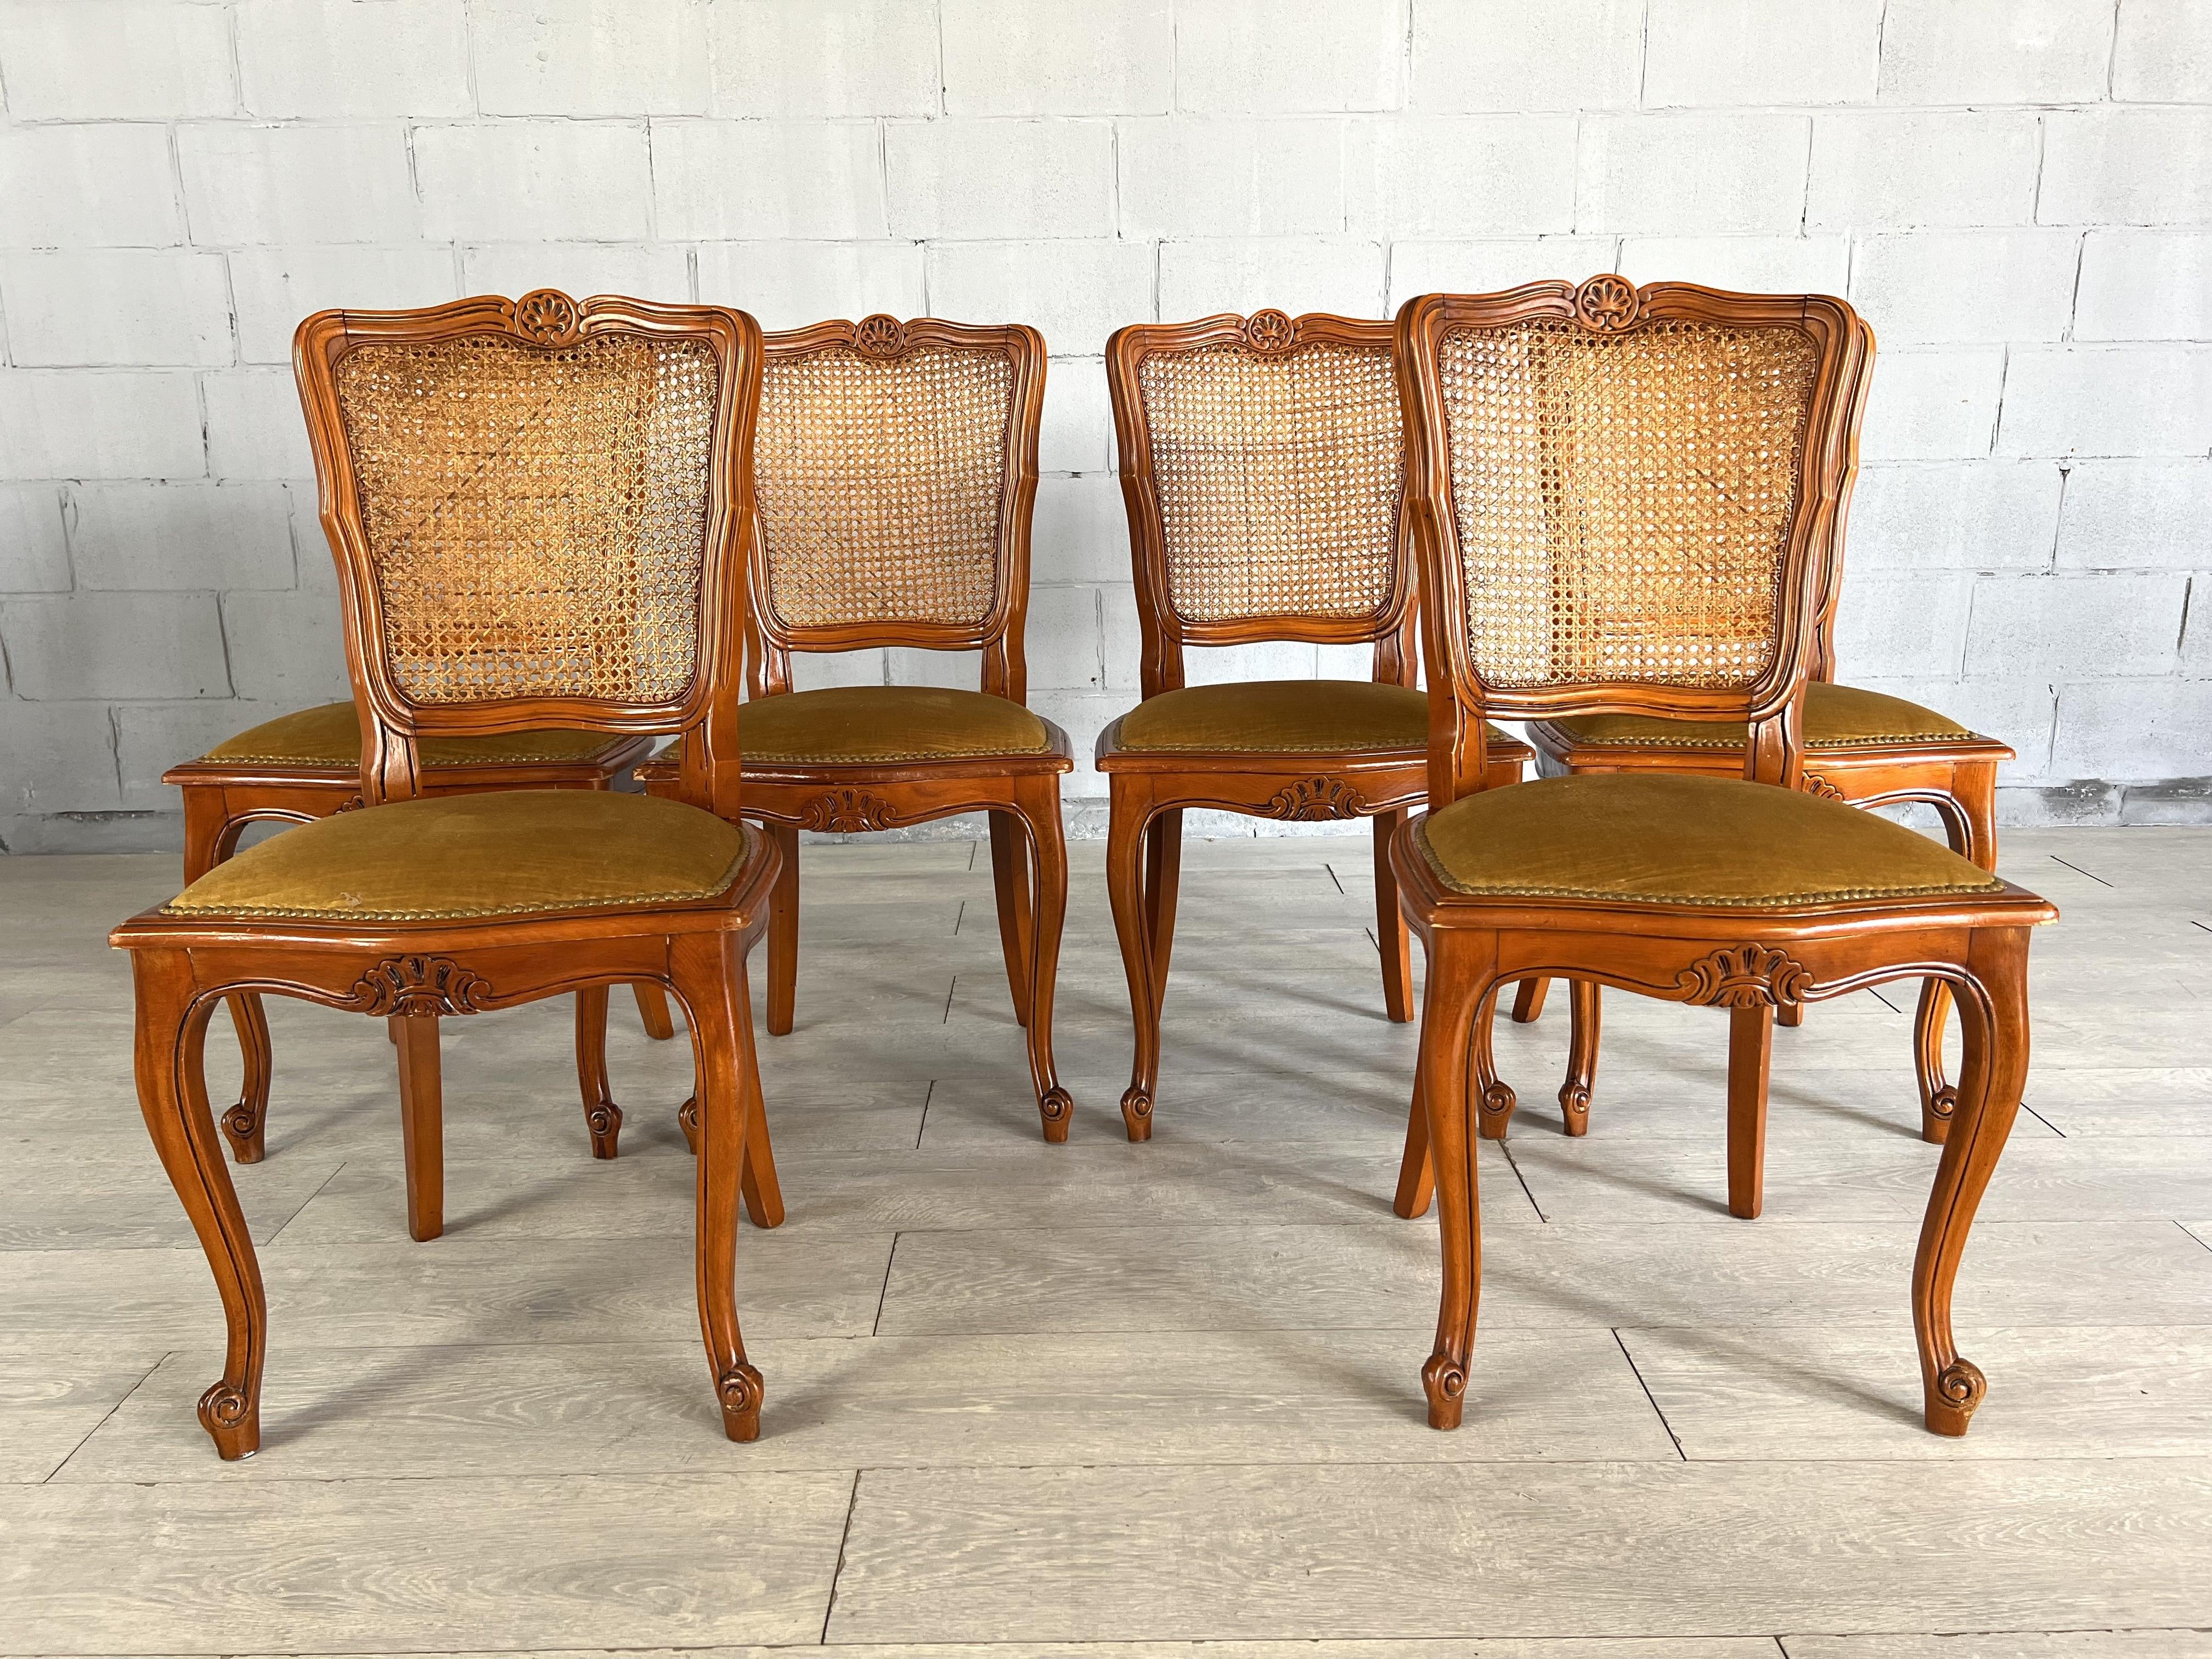 French Provincial Louis XV Style Carved Cane Back Dining Chairs - Set of 6 2